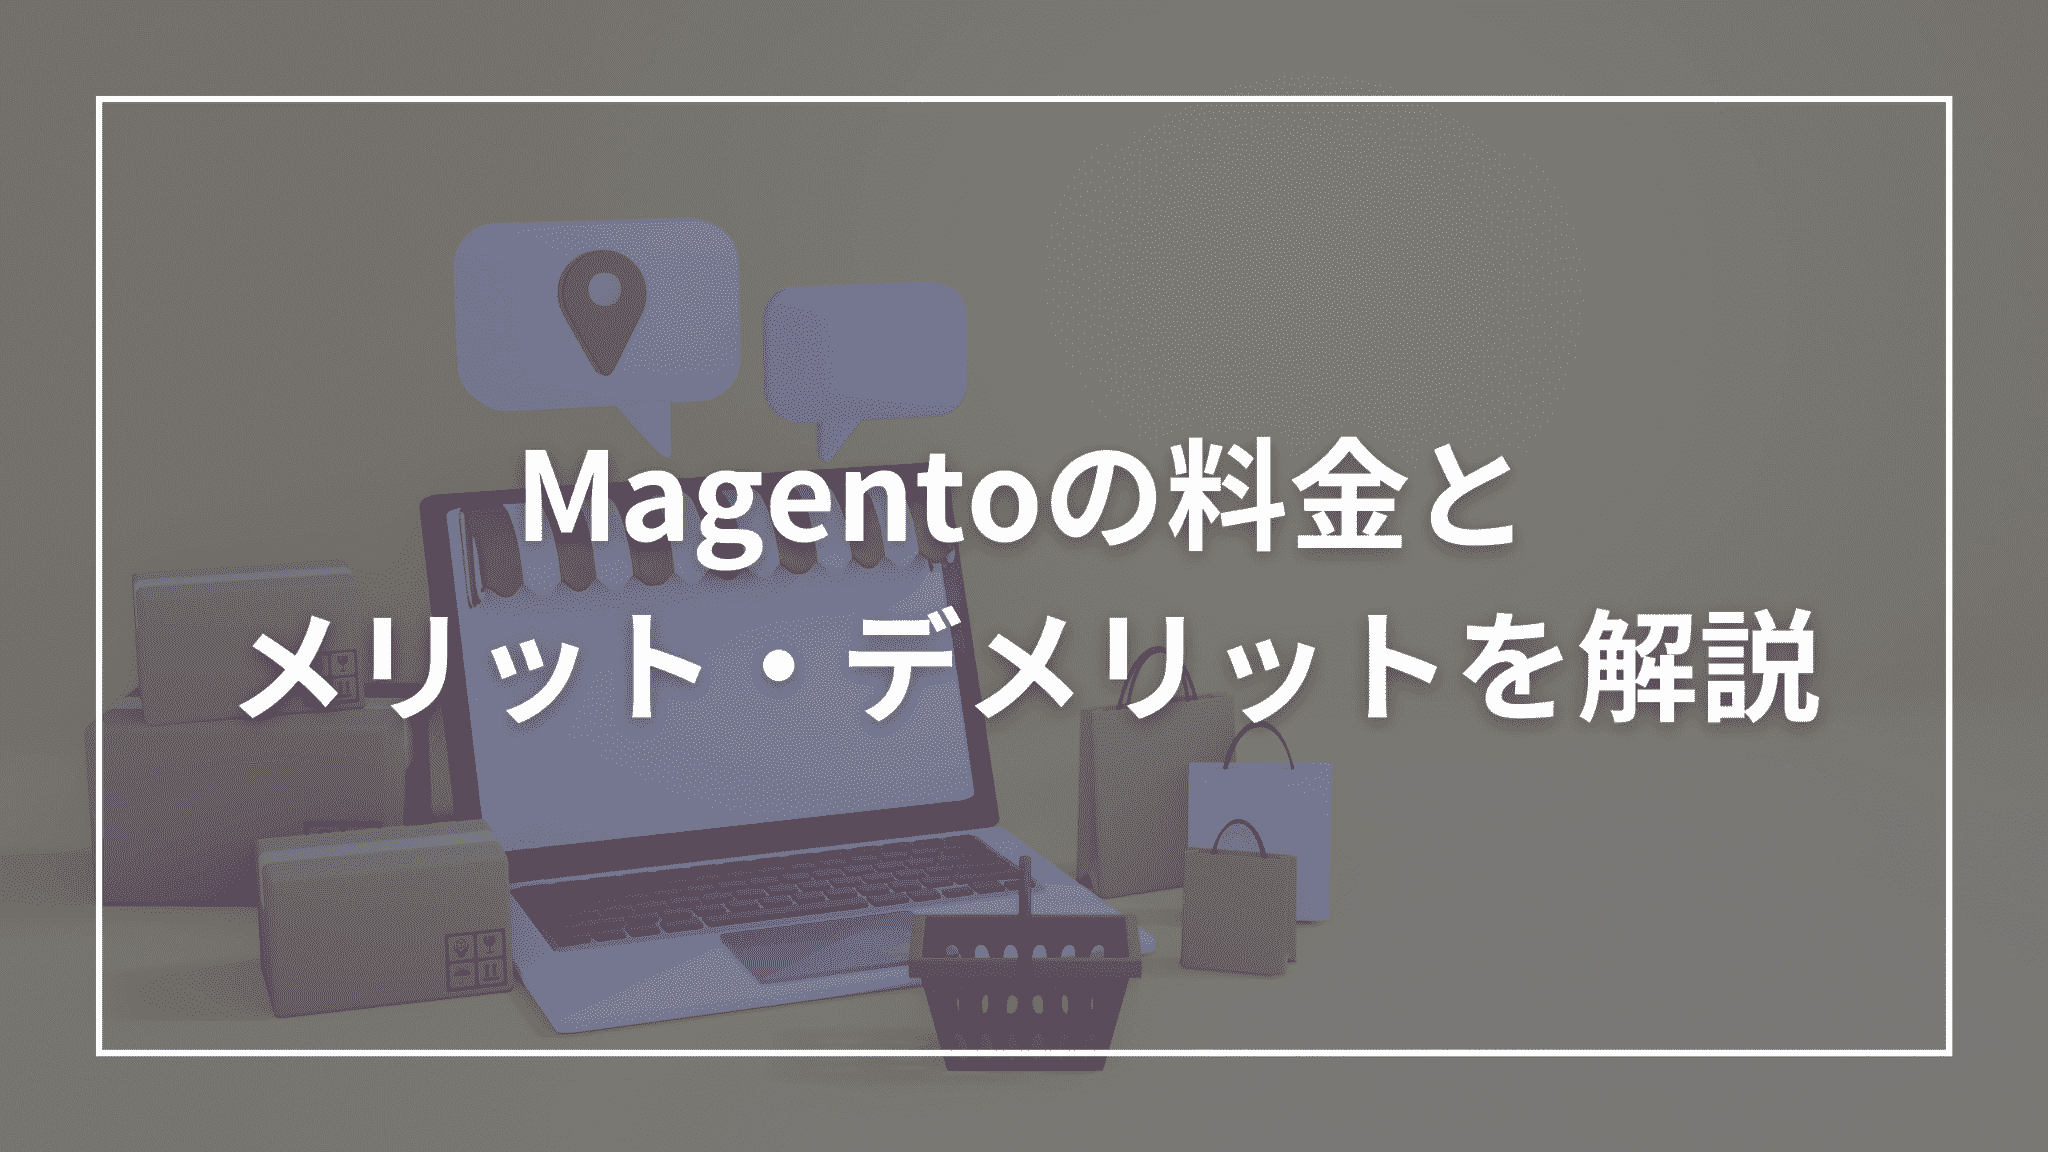 Magentoの料金とメリット・デメリットを解説